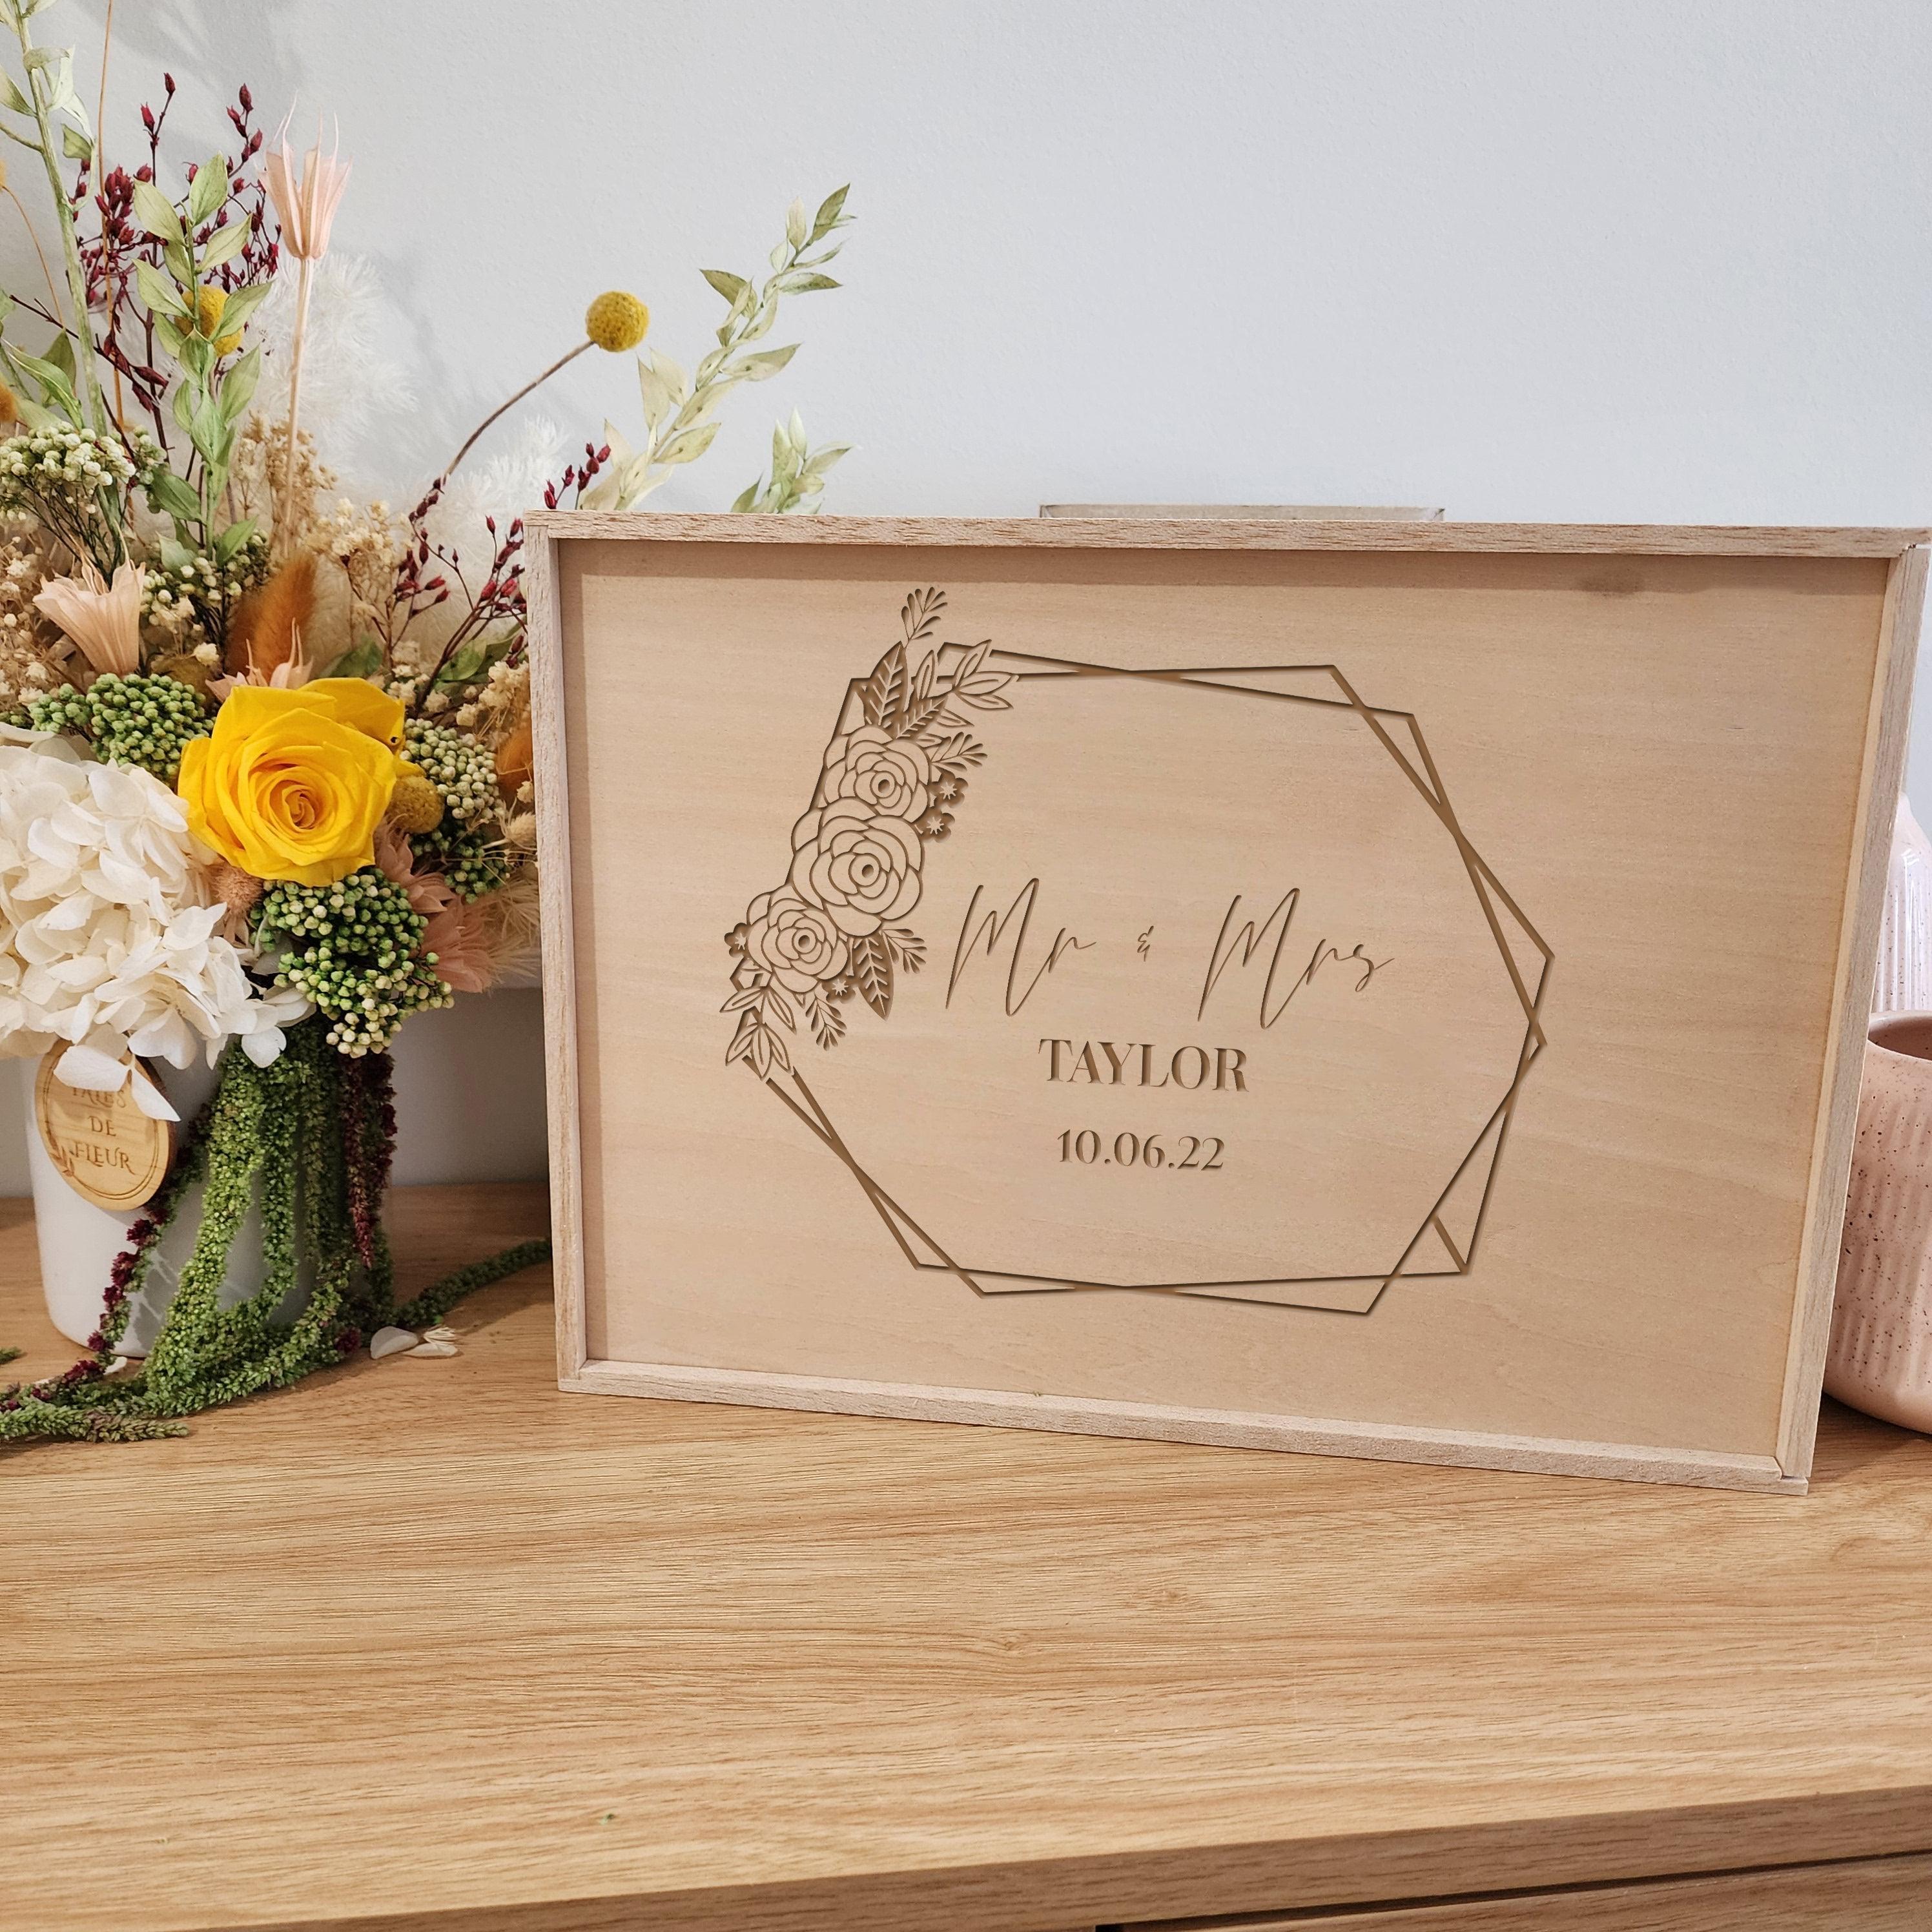 Personalised Double Hex Wreath Couples Memory Keepsake Box - Valentine's Day Gift - The Willow Corner